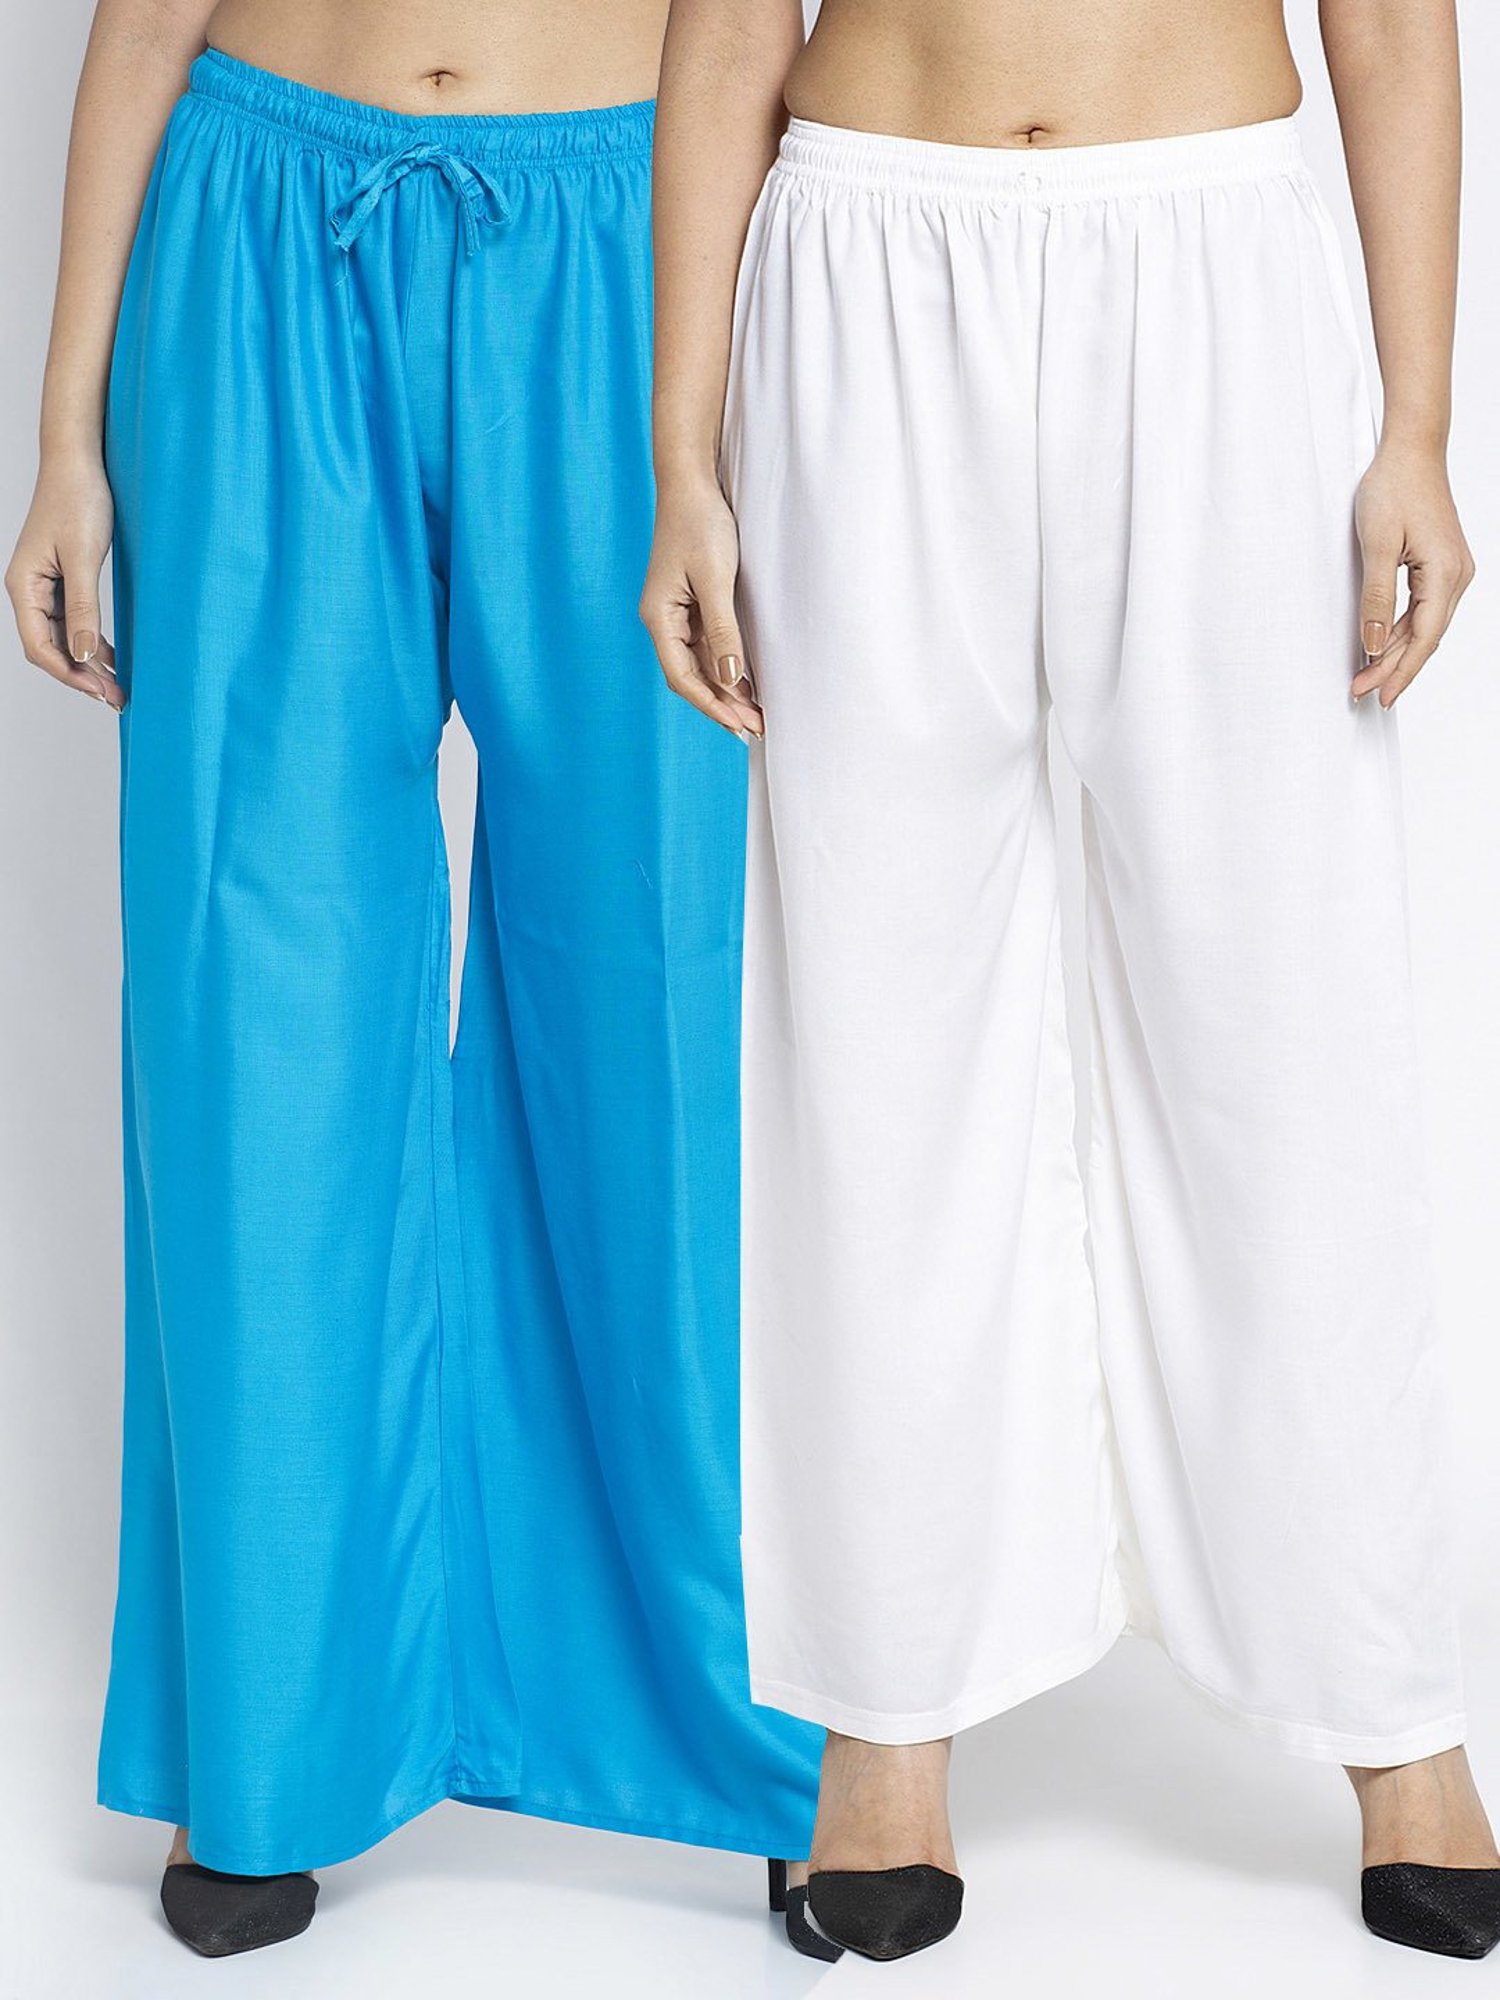 Buy VINSON Casual Flared Denim Palazzo Pants for Women (Light Blue,28)-(Pack  of 02) at Amazon.in